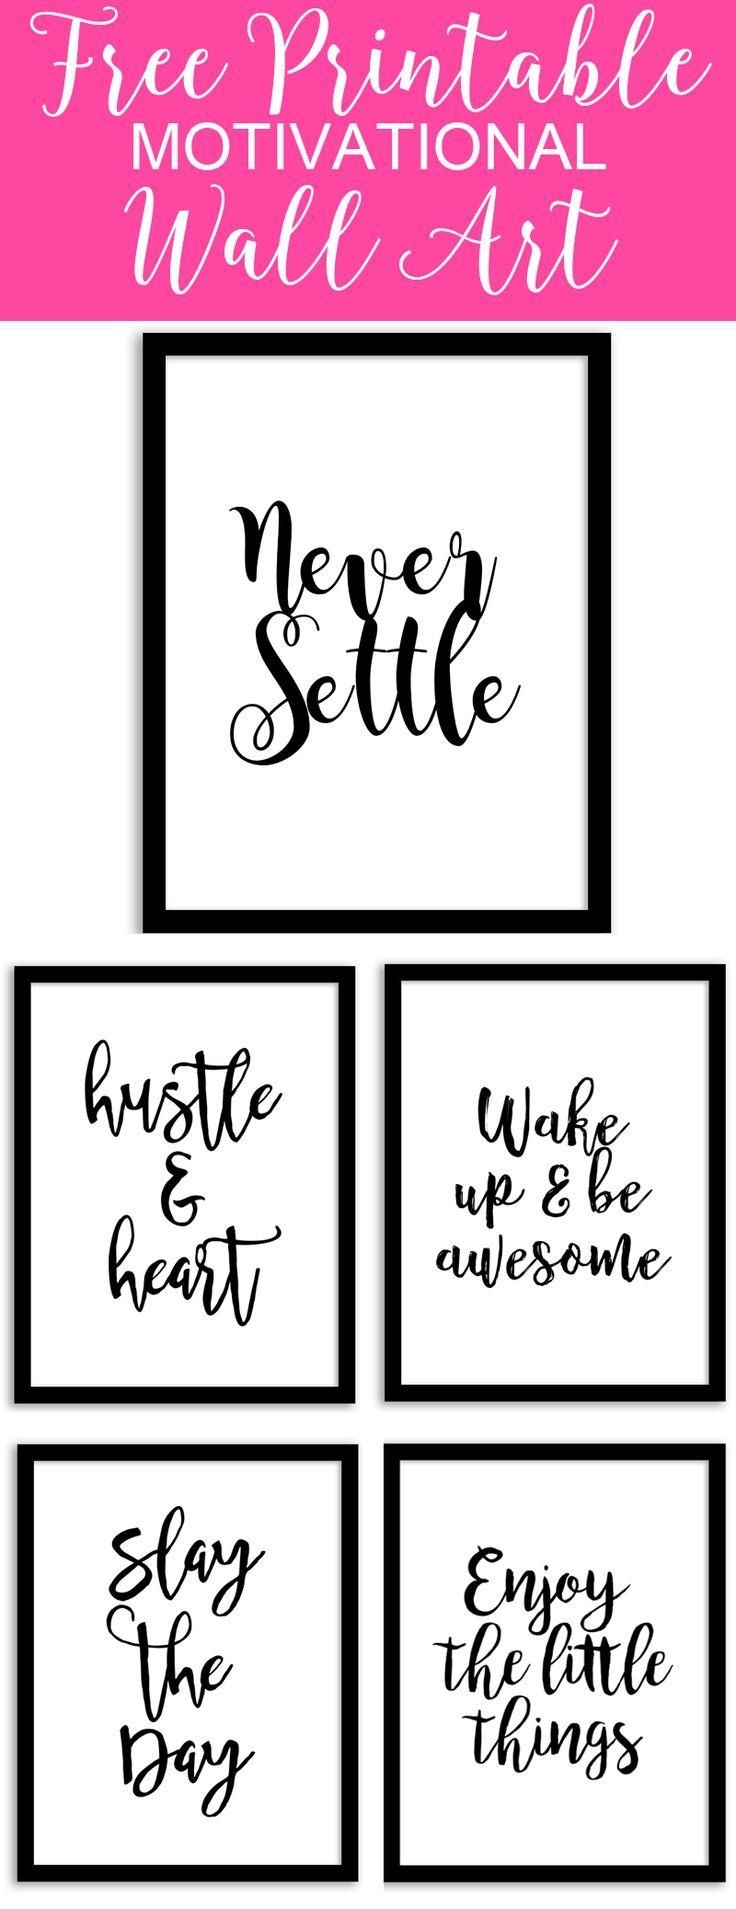 25+ Best Free Printable Quotes Ideas On Pinterest | Inspirational For Printable Wall Art Quotes (Photo 2 of 20)